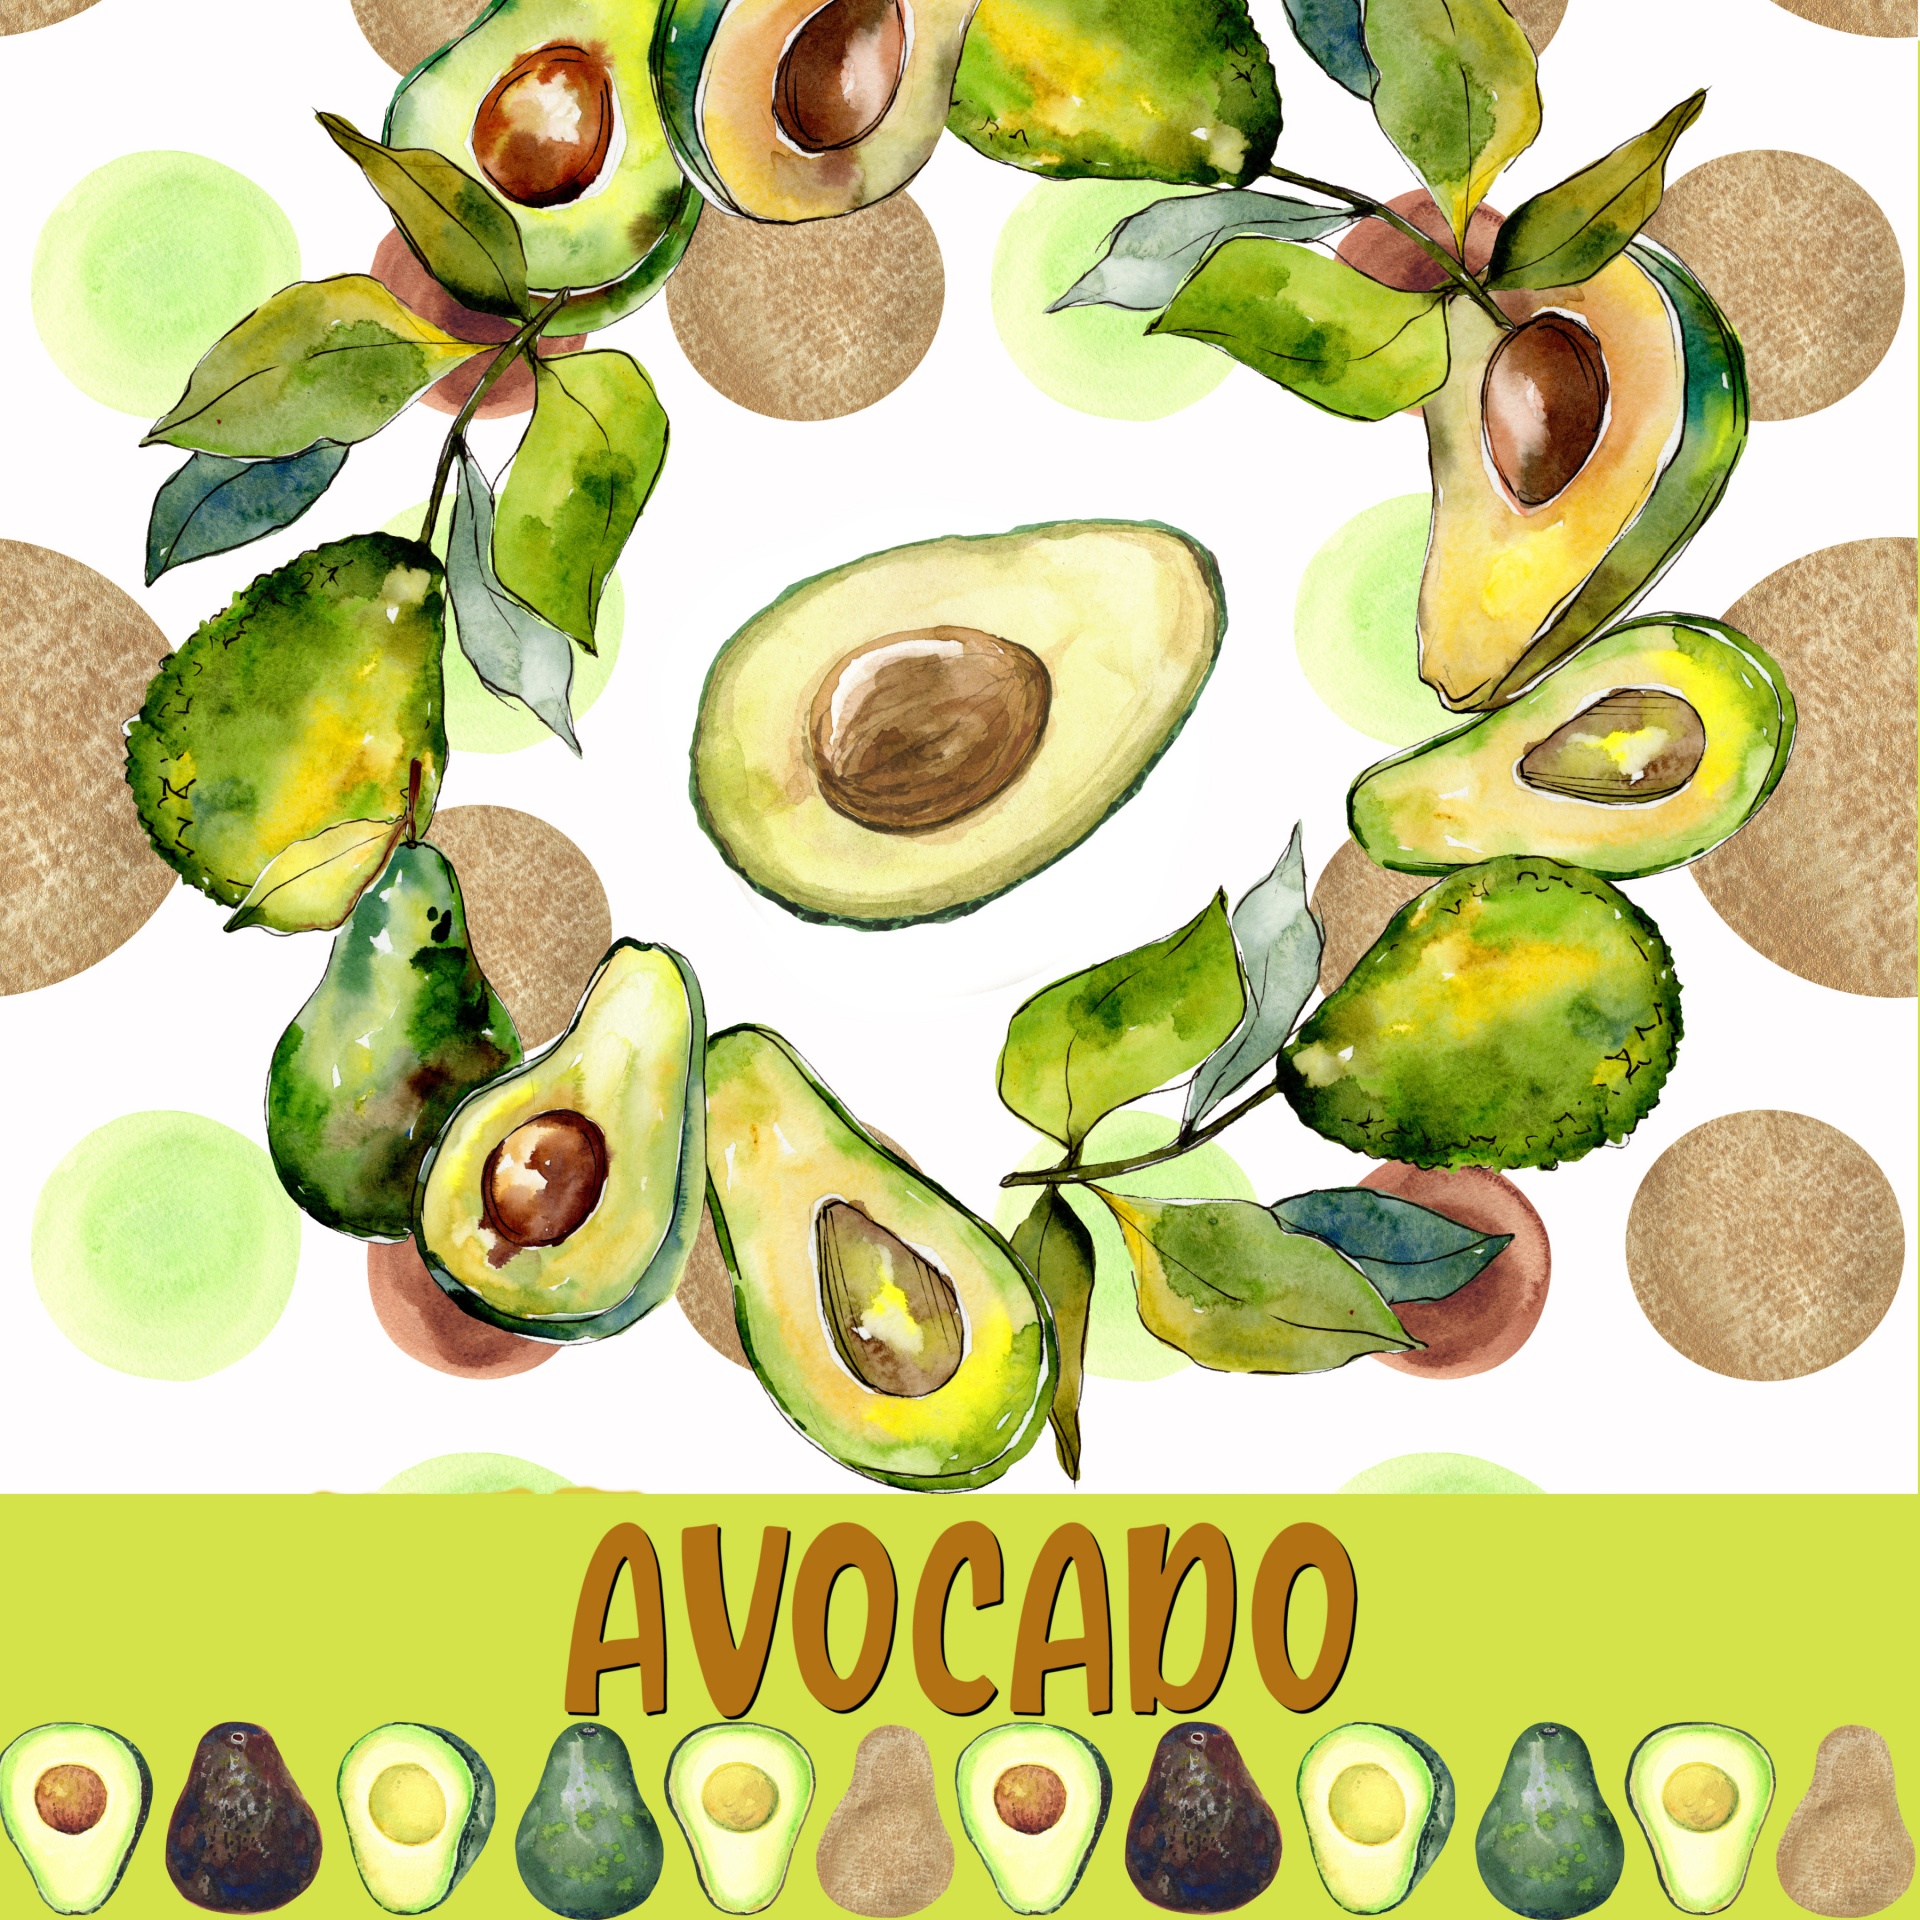 the word AVOCADO with a watercolor wreath illustration flat lay of a sliced Avocado on an avocado patterned background